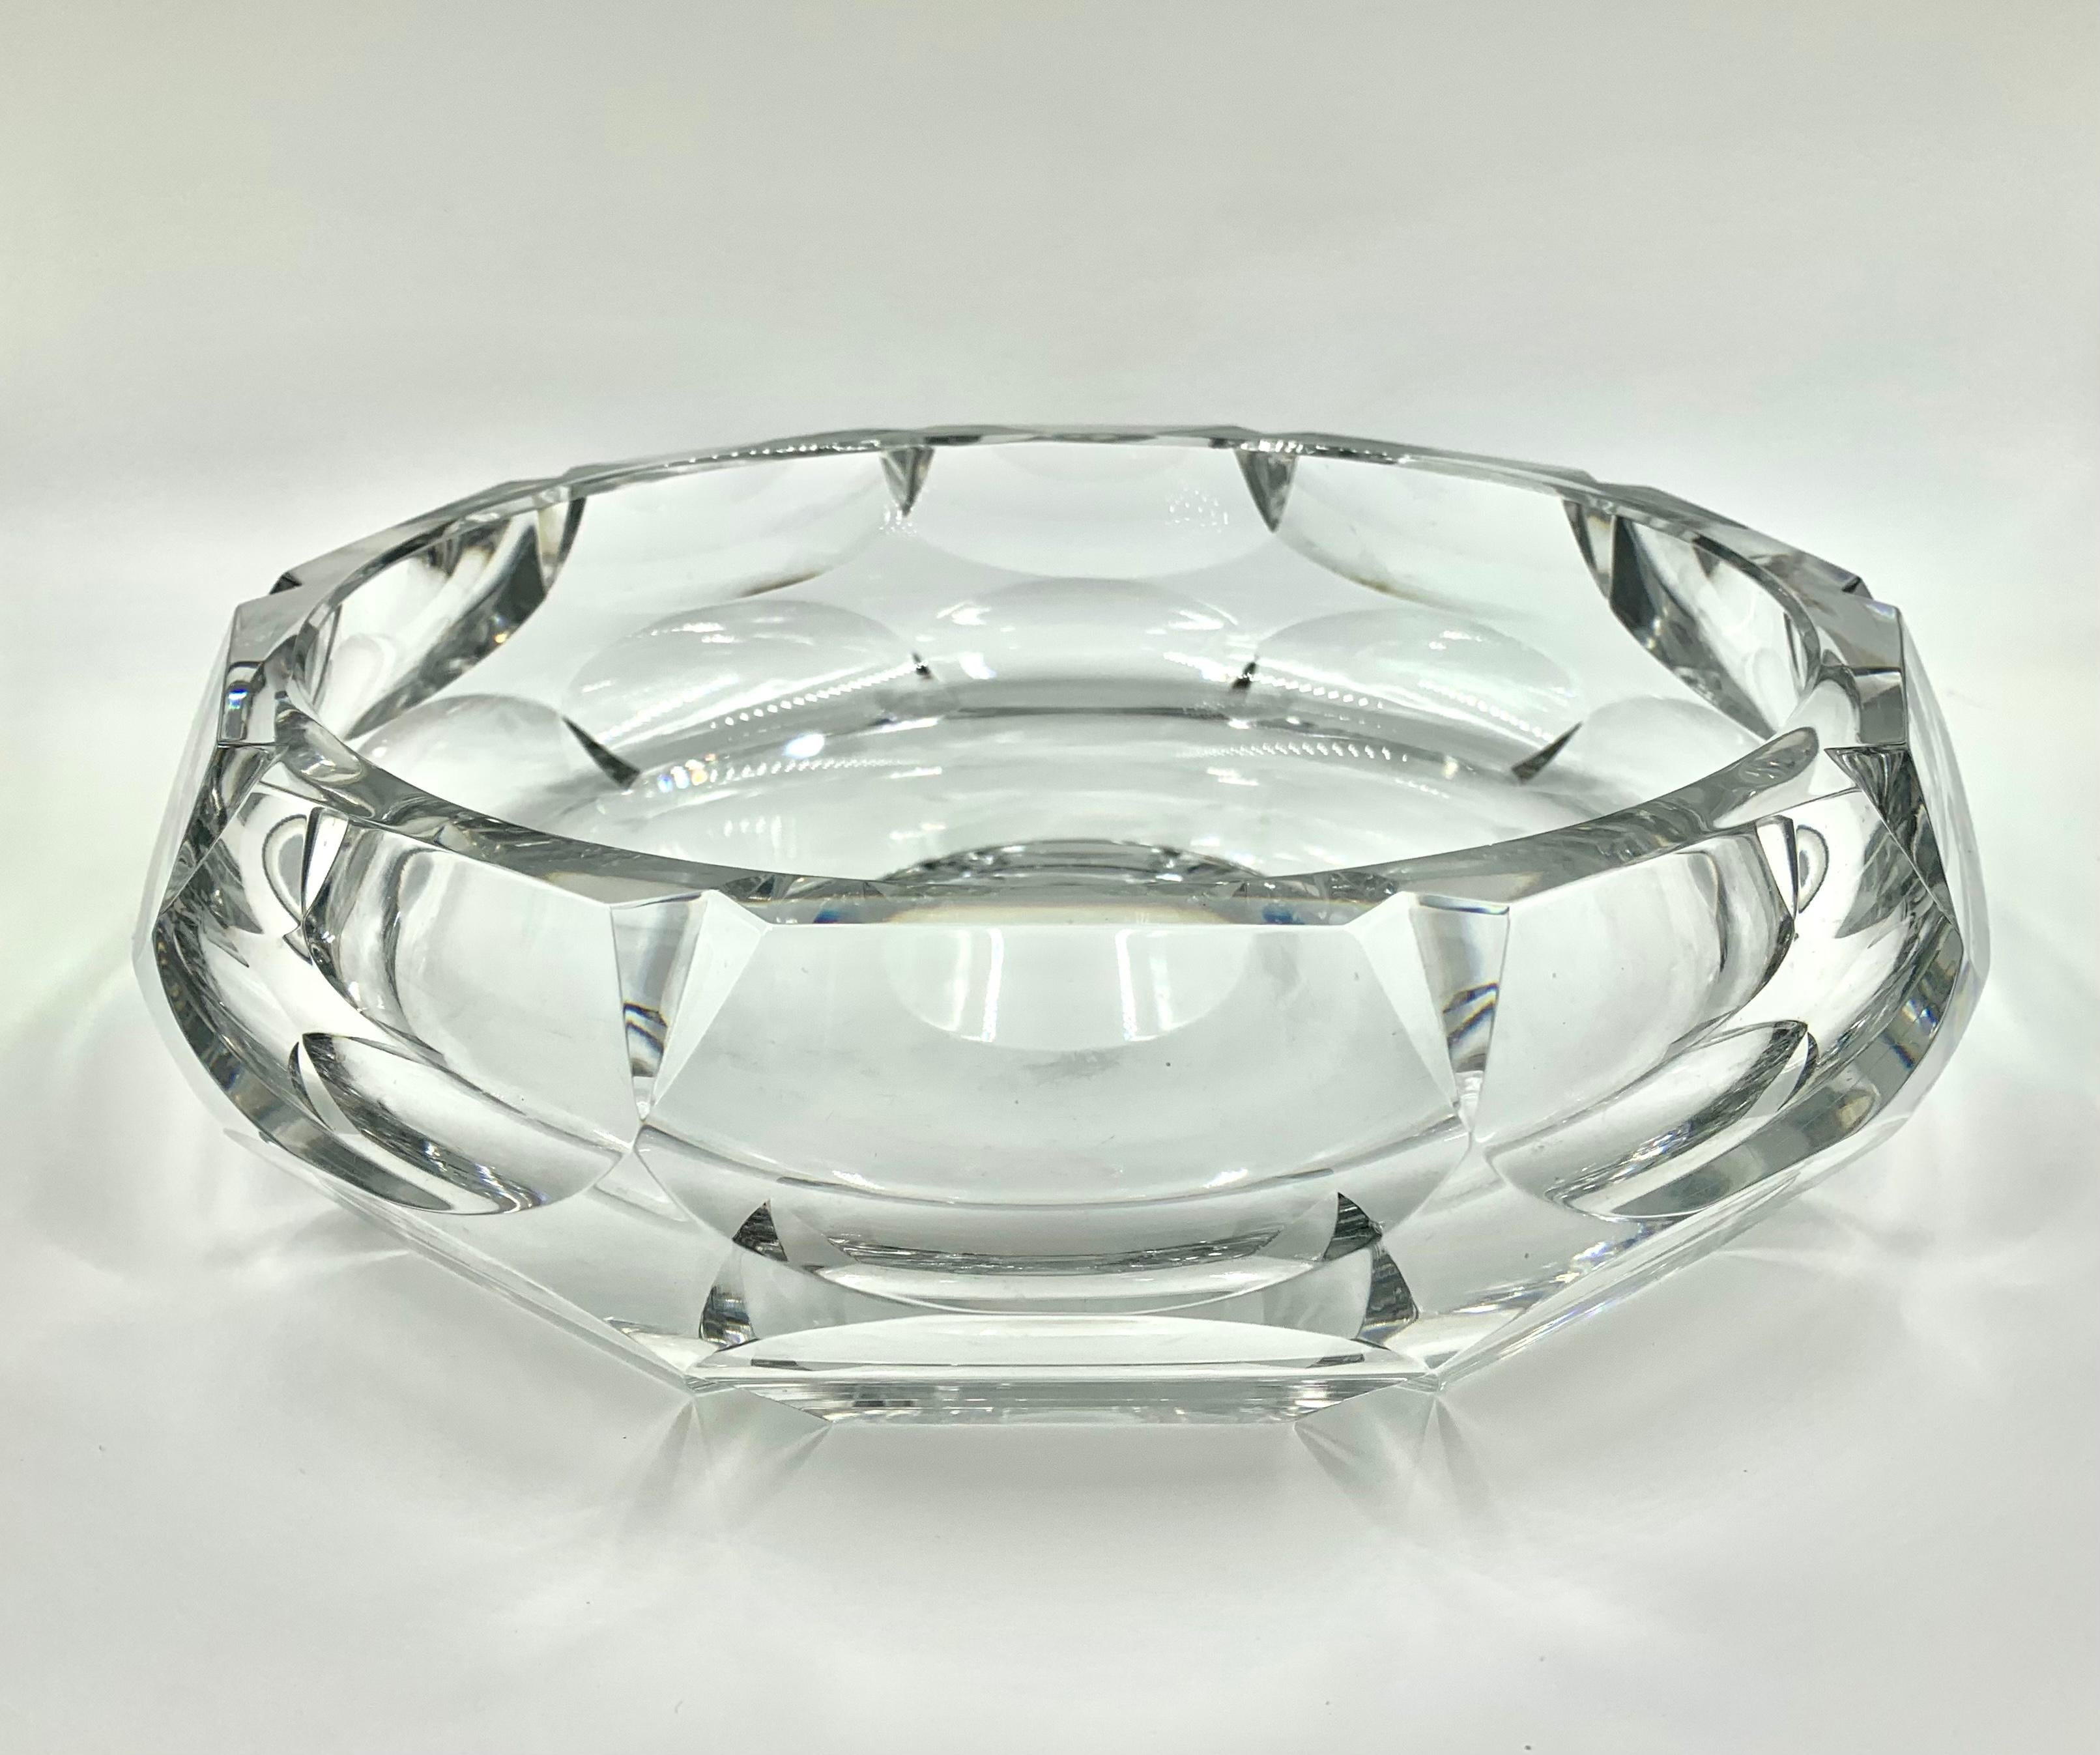 French Massive Estate Baccarat Crystal Centerpiece, Early 20th Century For Sale